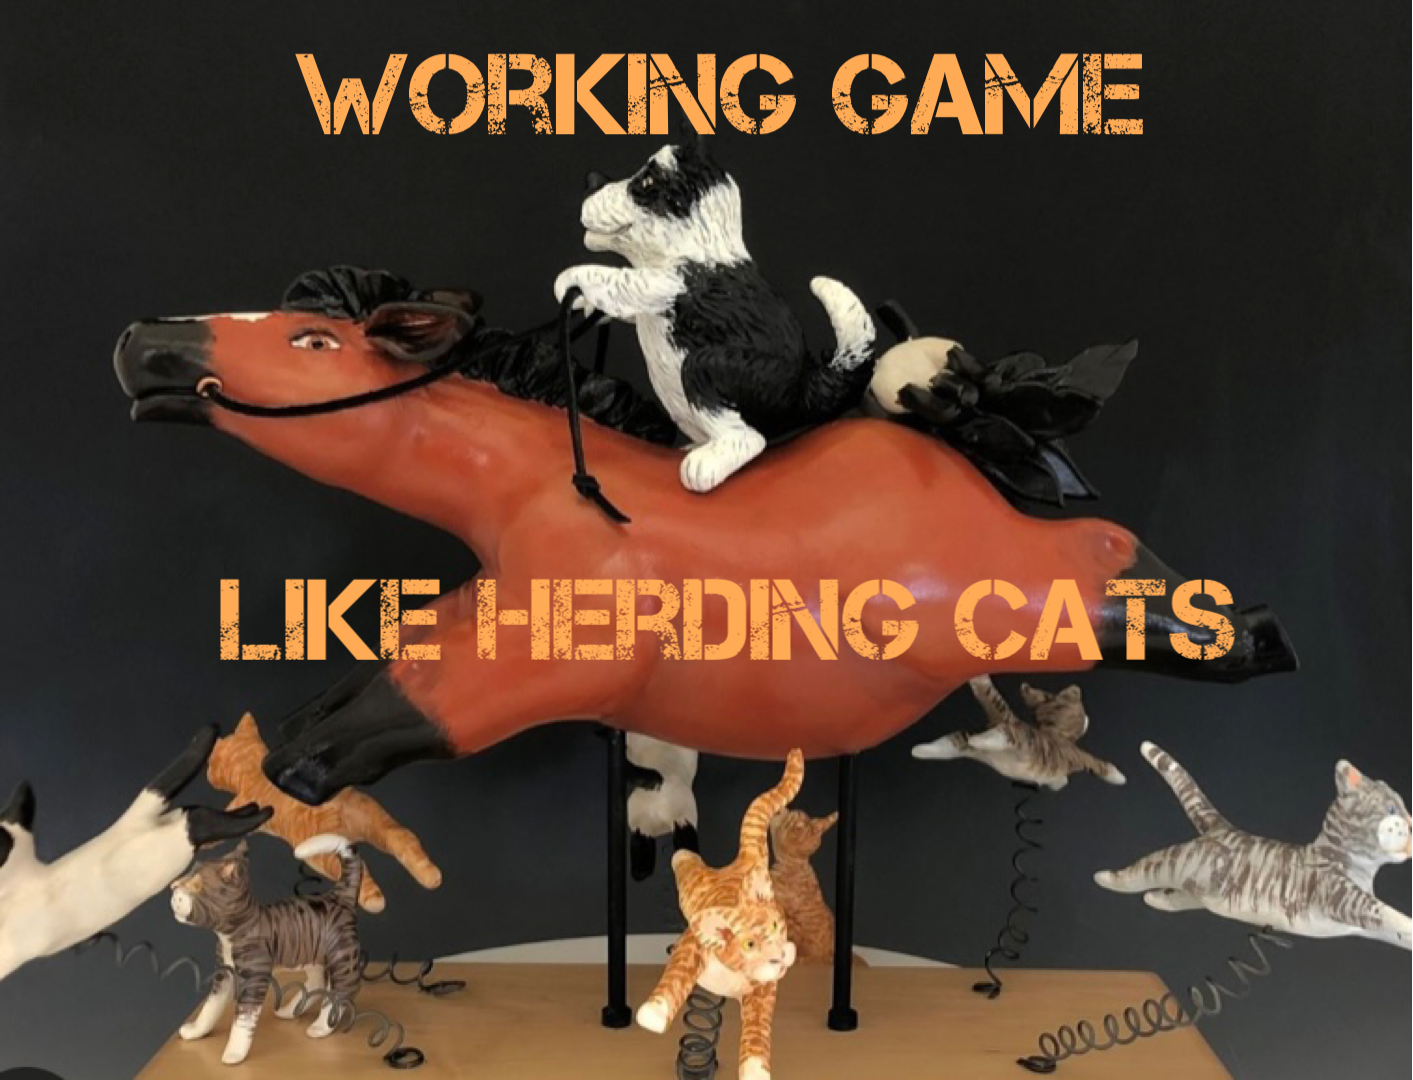 https://workinggamepodcast.com/wp-content/uploads/2023/04/Like-Herding-Cats.png